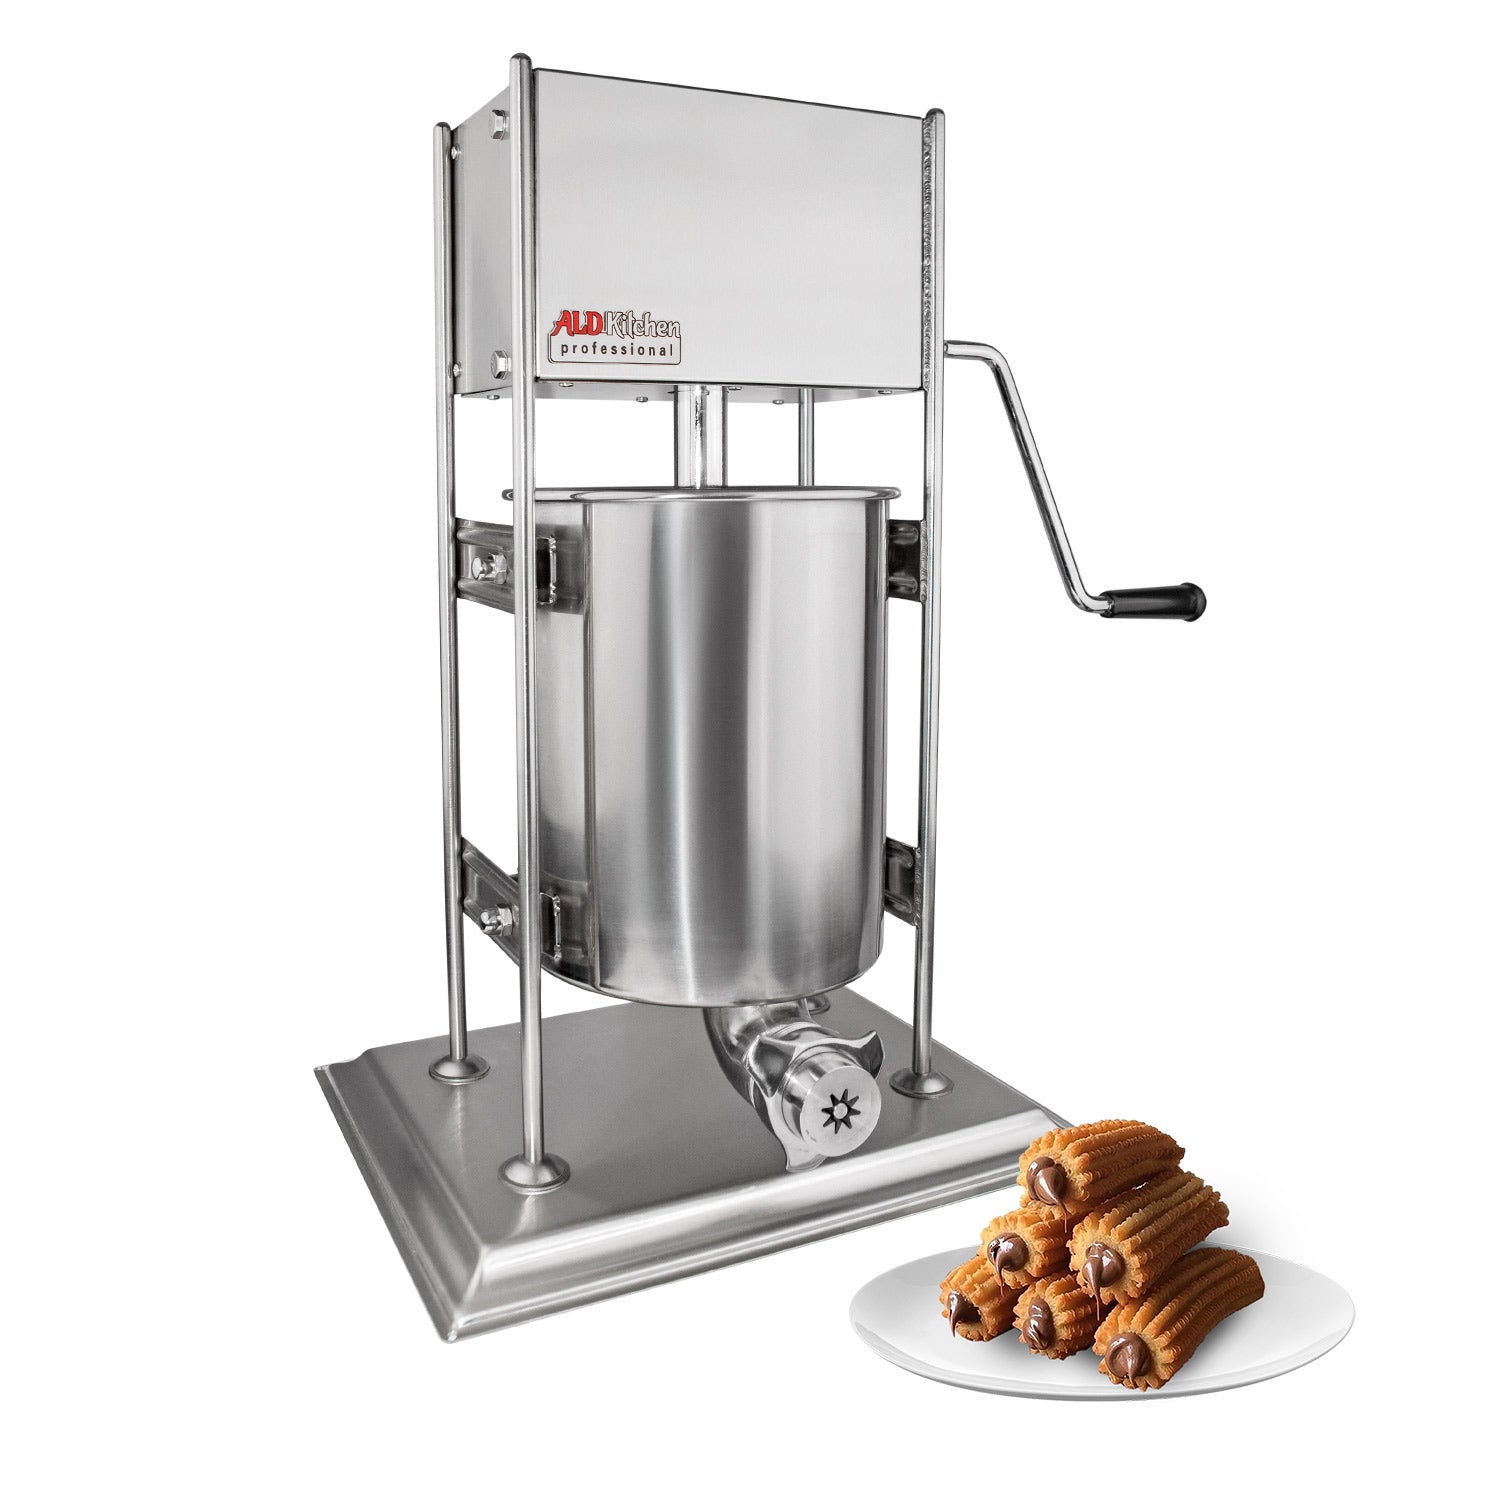 ALDKitchen Churros Machine Manual, Deep-Frying Churro Maker with Working  Stand, Stainless Steel